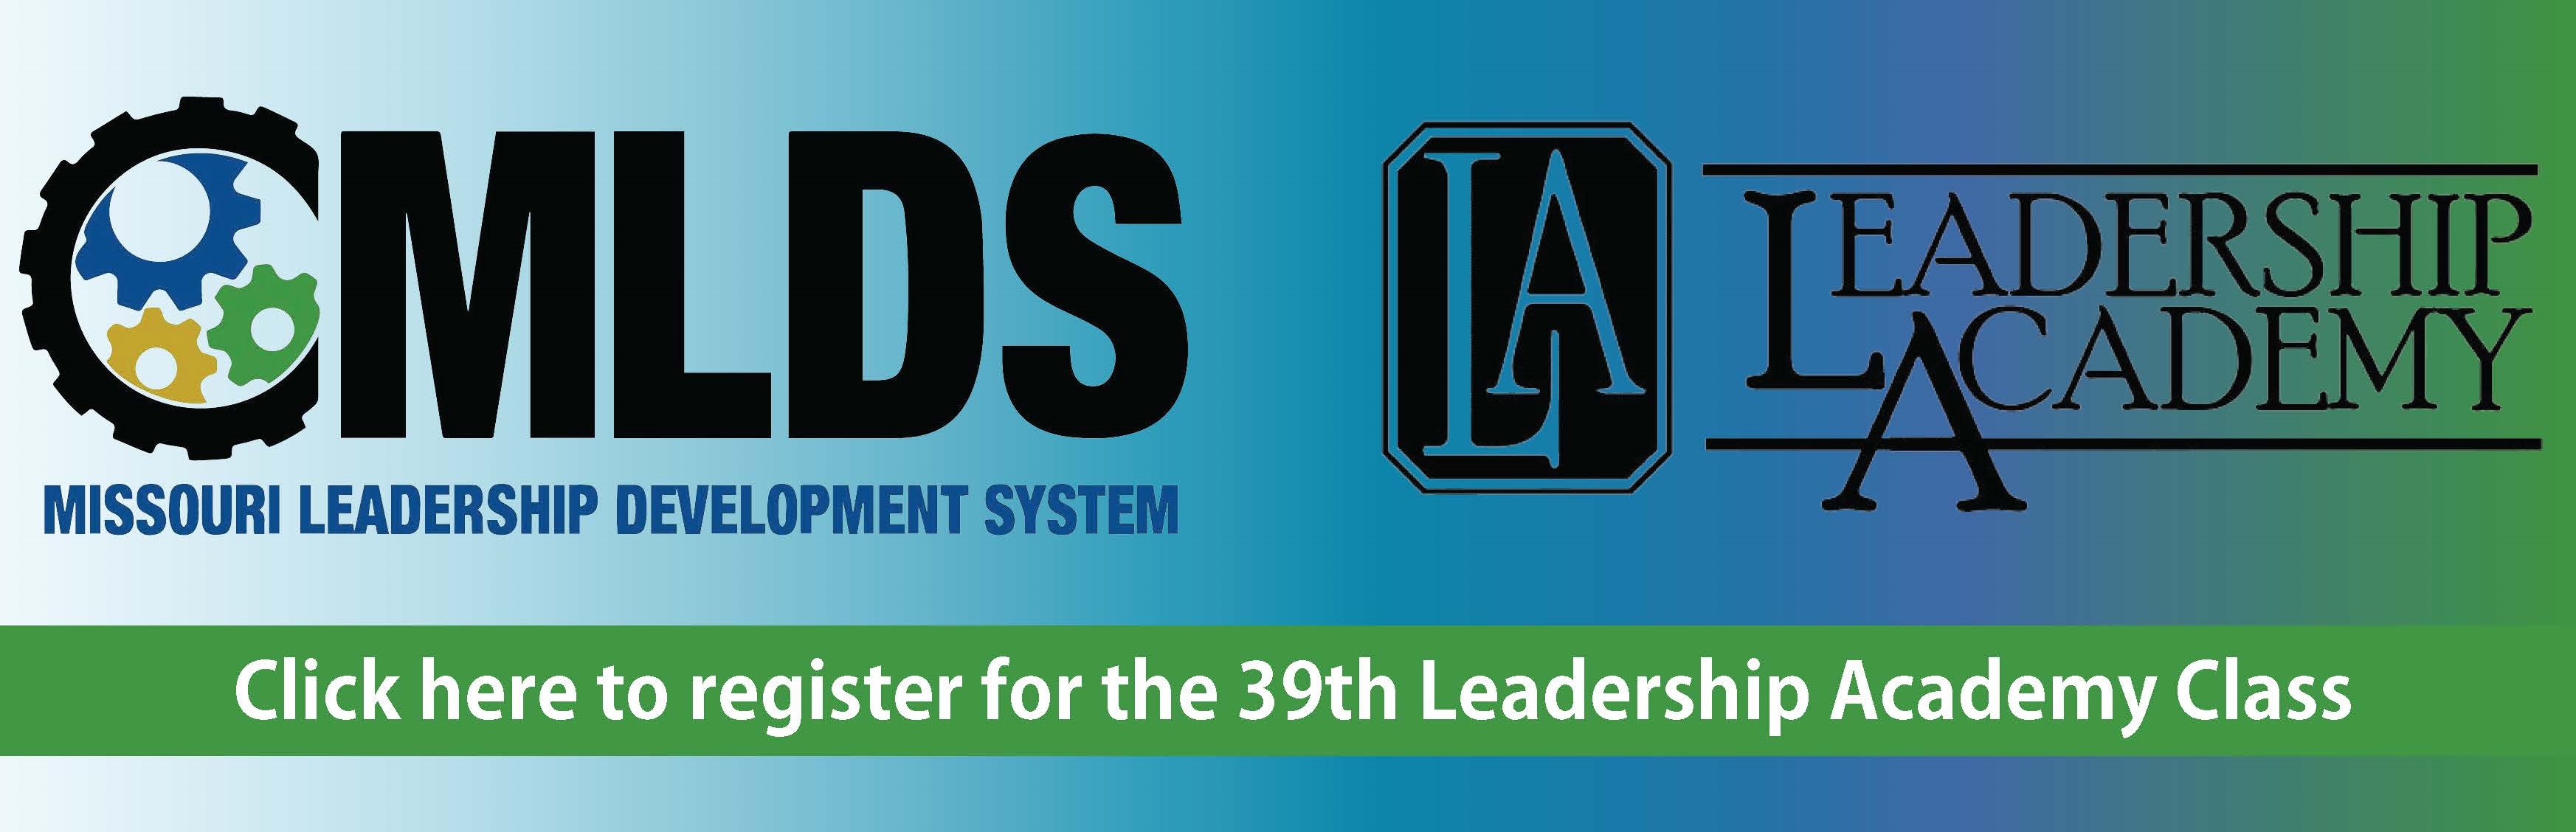 Missouri Leadership Development System Leadership Academy: Click here to register for the 39th Leadership Academy Class